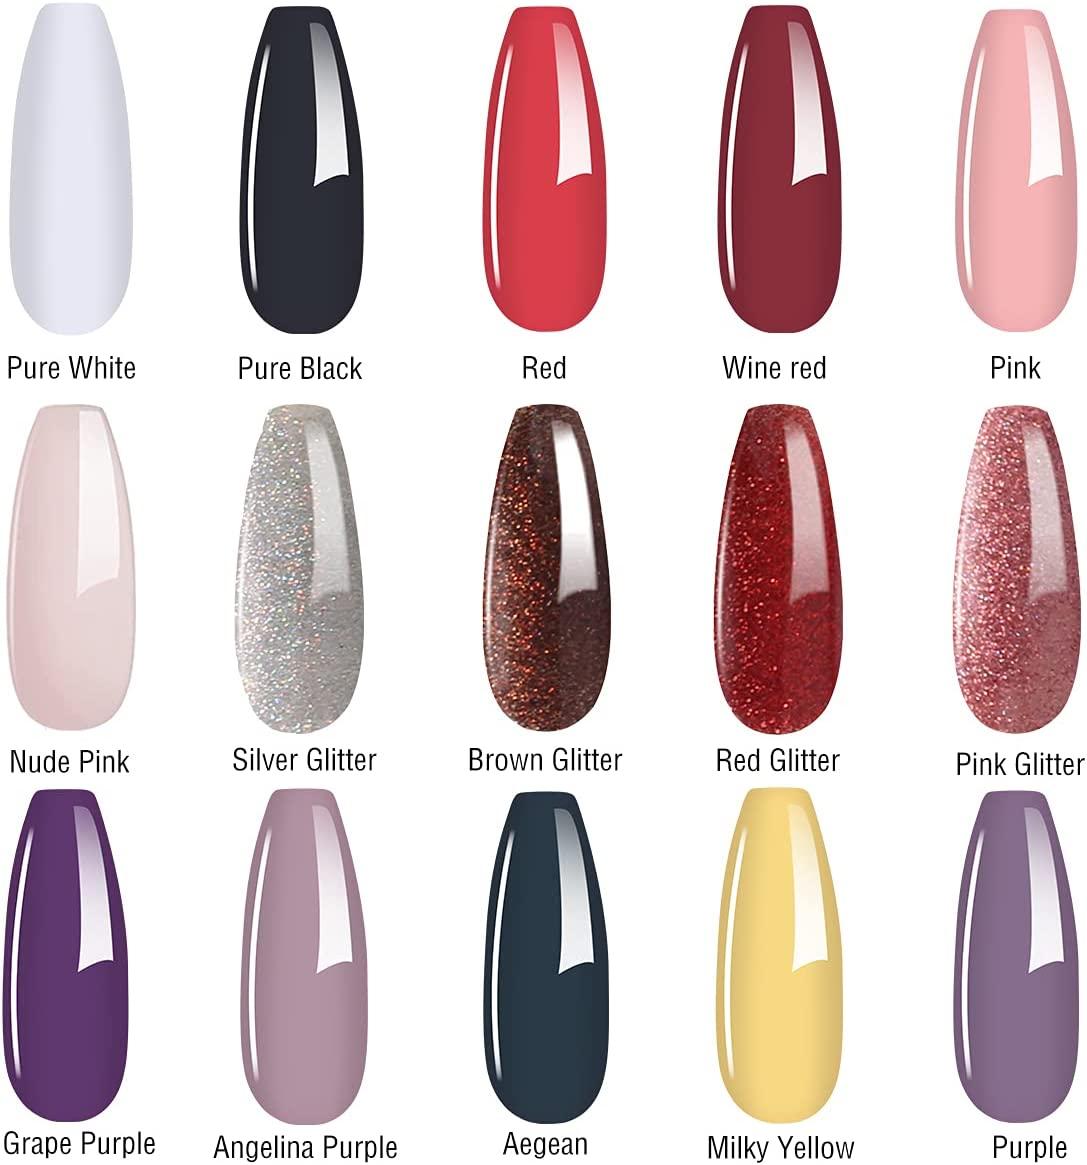 keusn color changing gel nail polish temperature changing pink purple with  glitter ombre nail art soak long lasting manicure colors kit holiday gift  10ml - Walmart.com